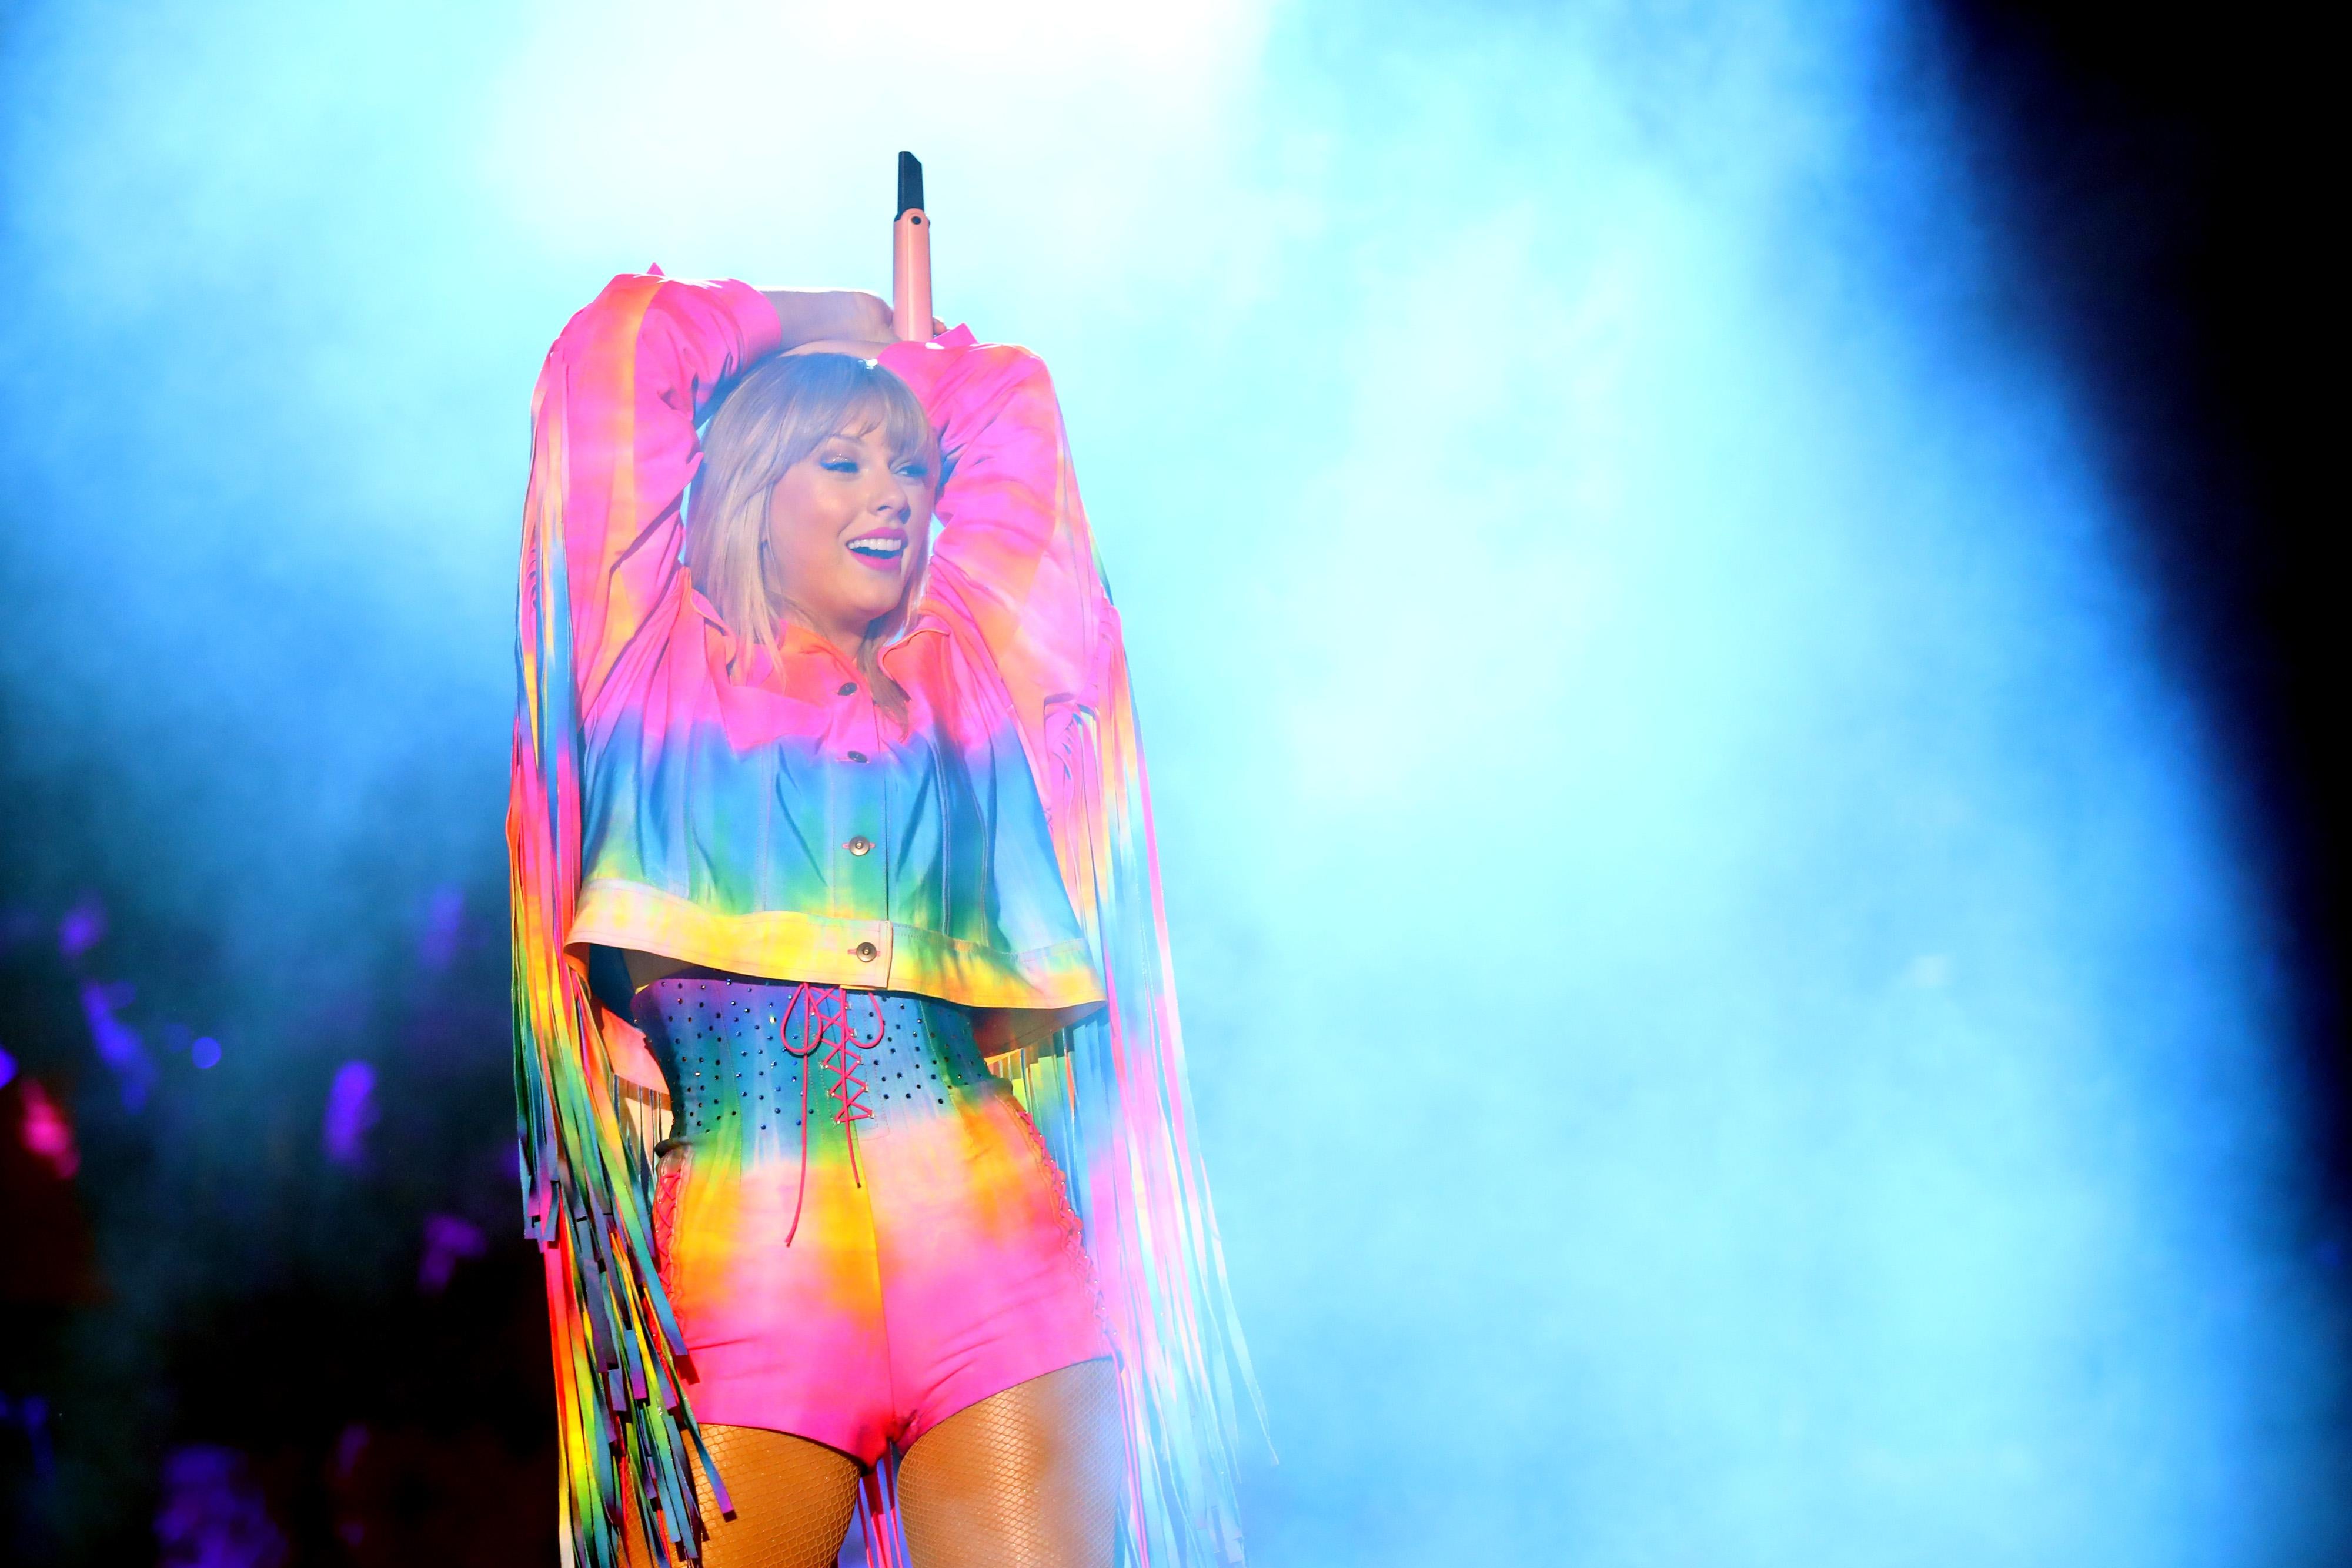 Taylor Swift on stage in a rainbow outfit.